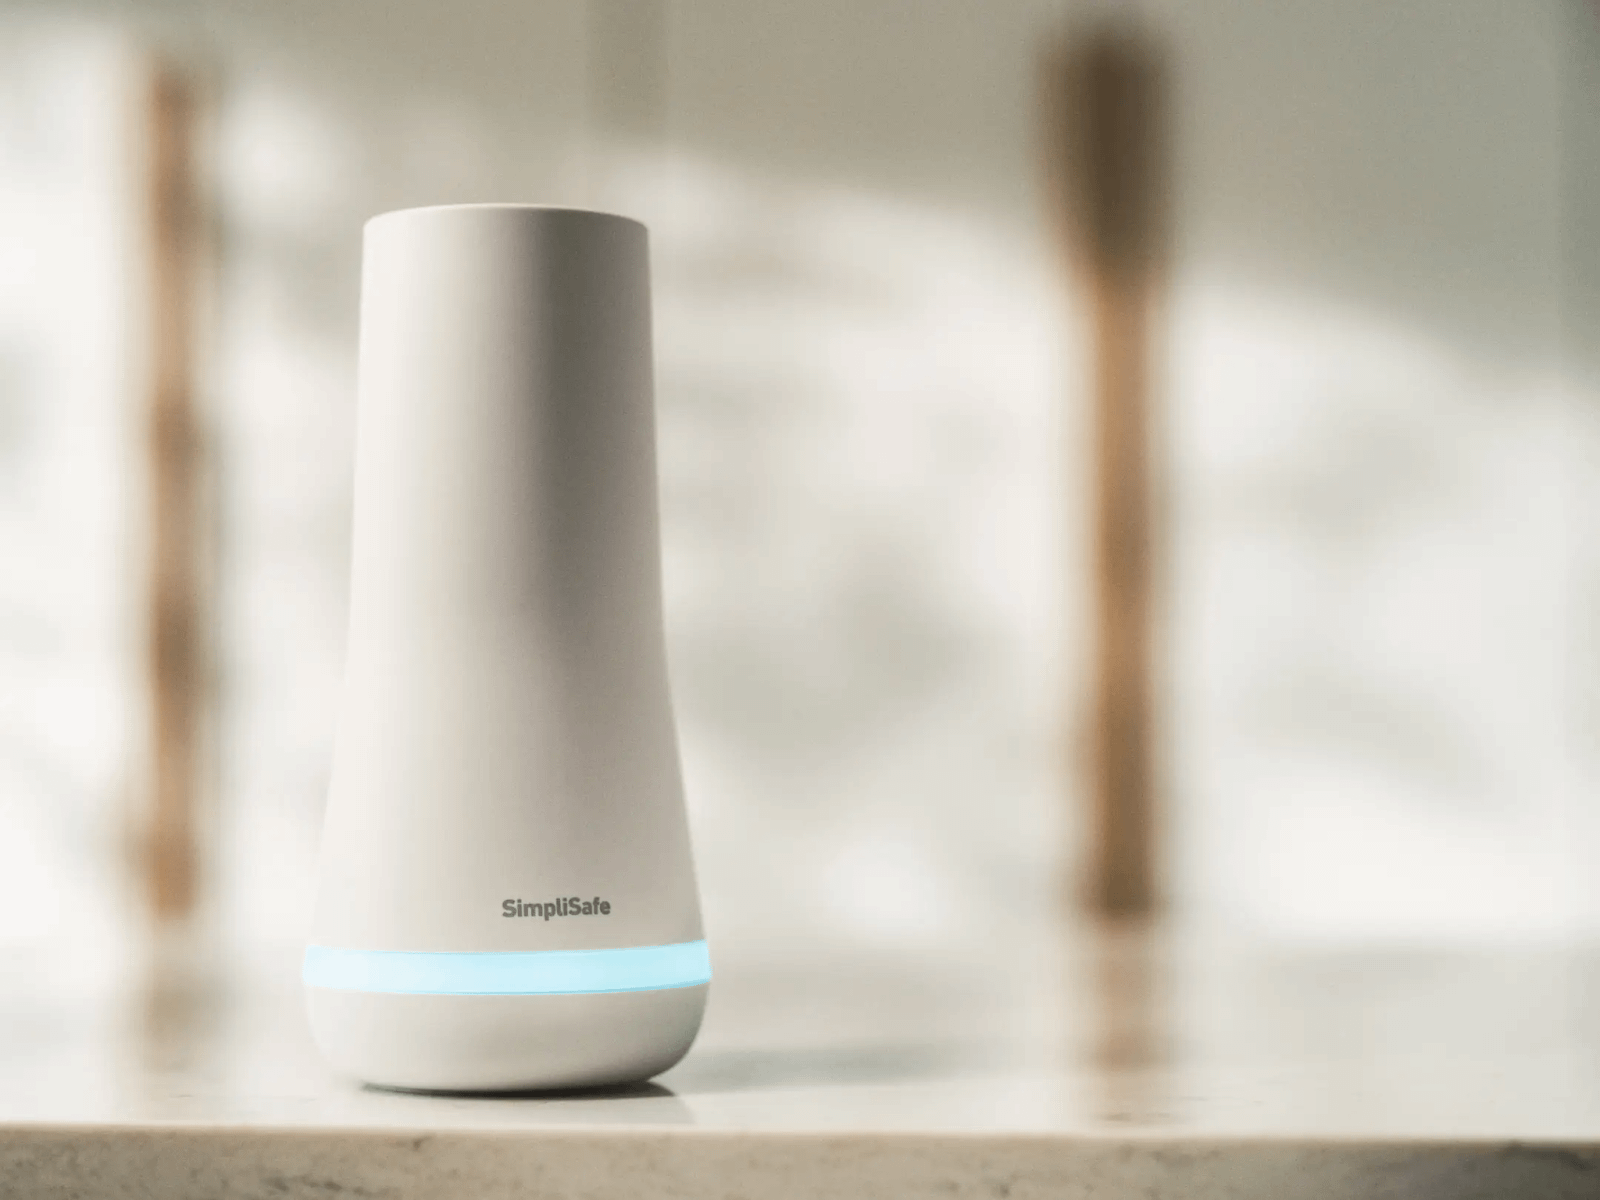 Are you torn between Vivint and SimpliSafe? Check out our guide today to see which is the better option for you! vivint vs simplisafe 99178625 simplisafe